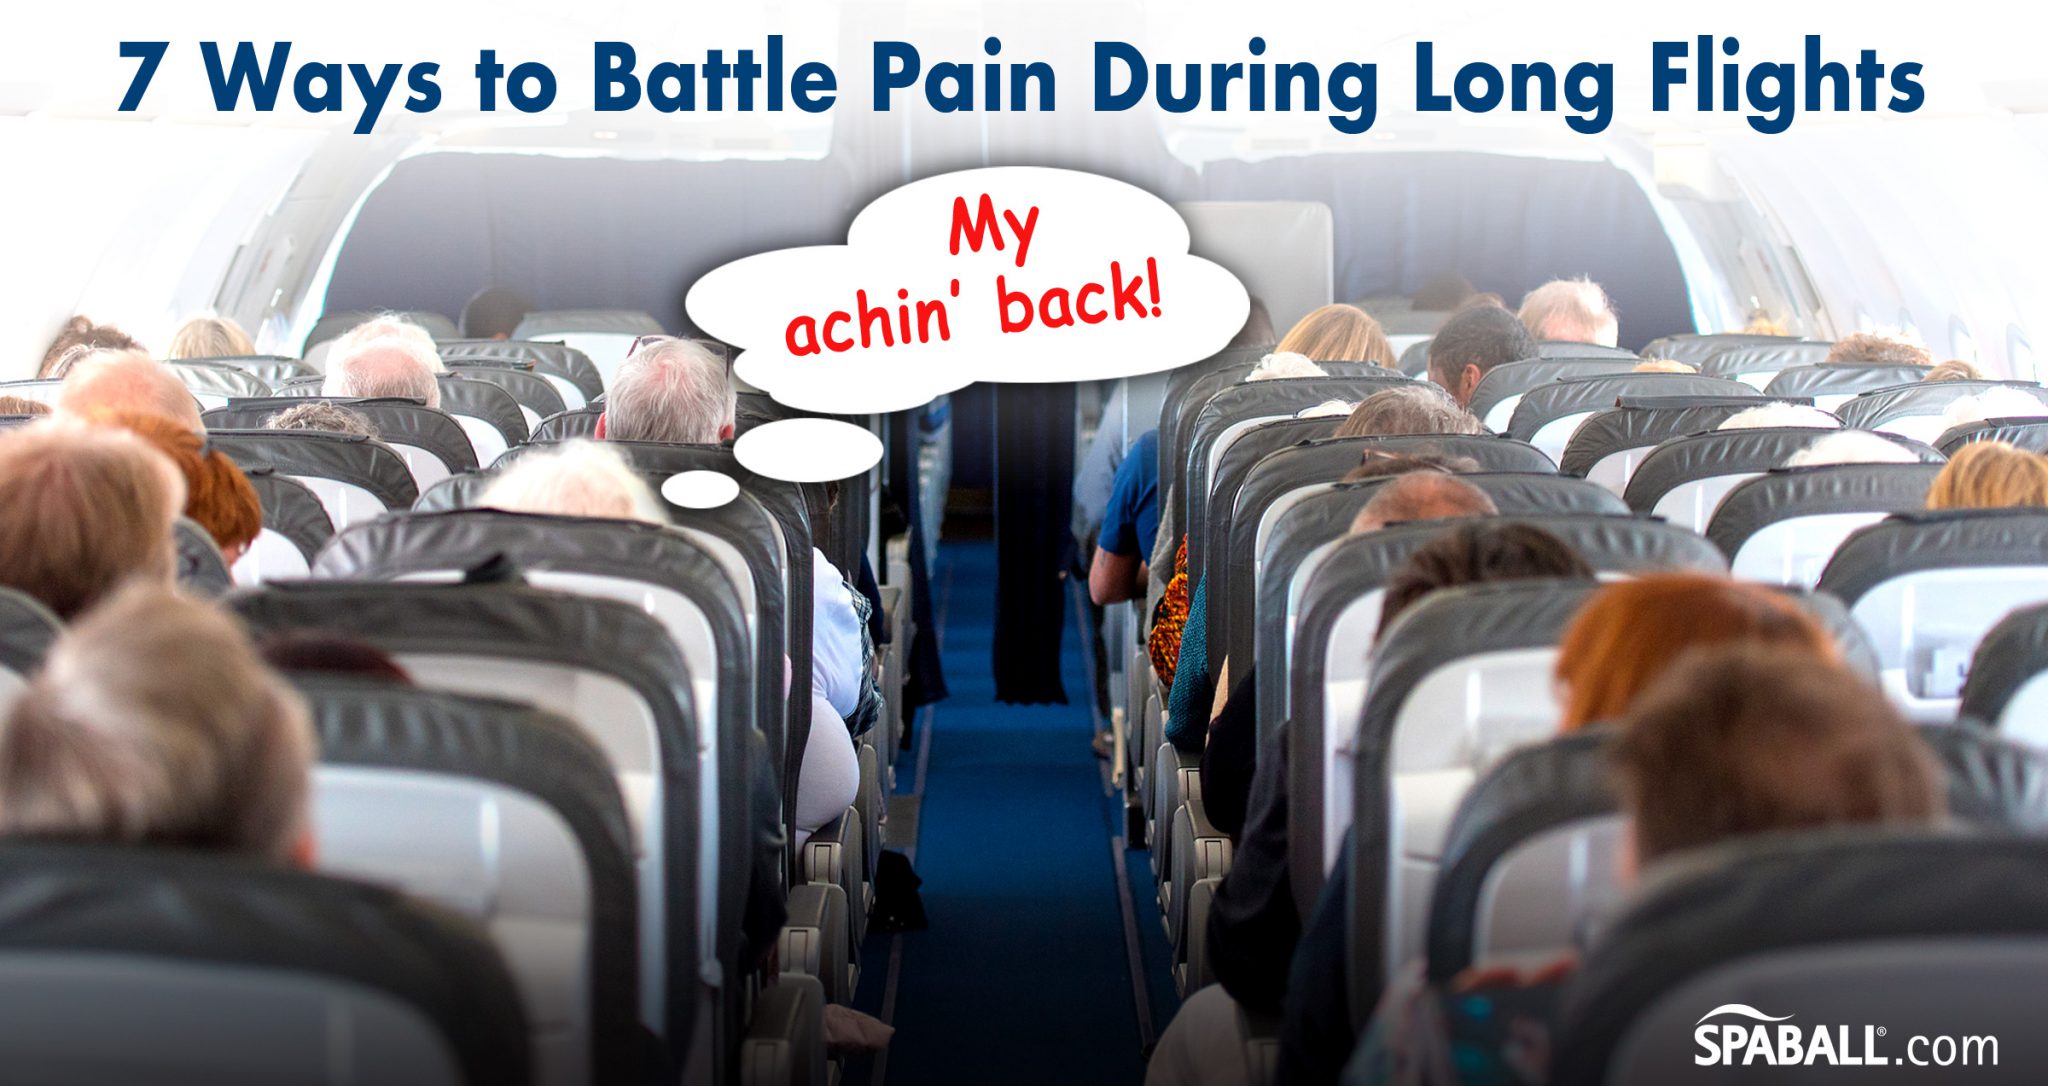 7 Ways to Battle Pain During Long Flights